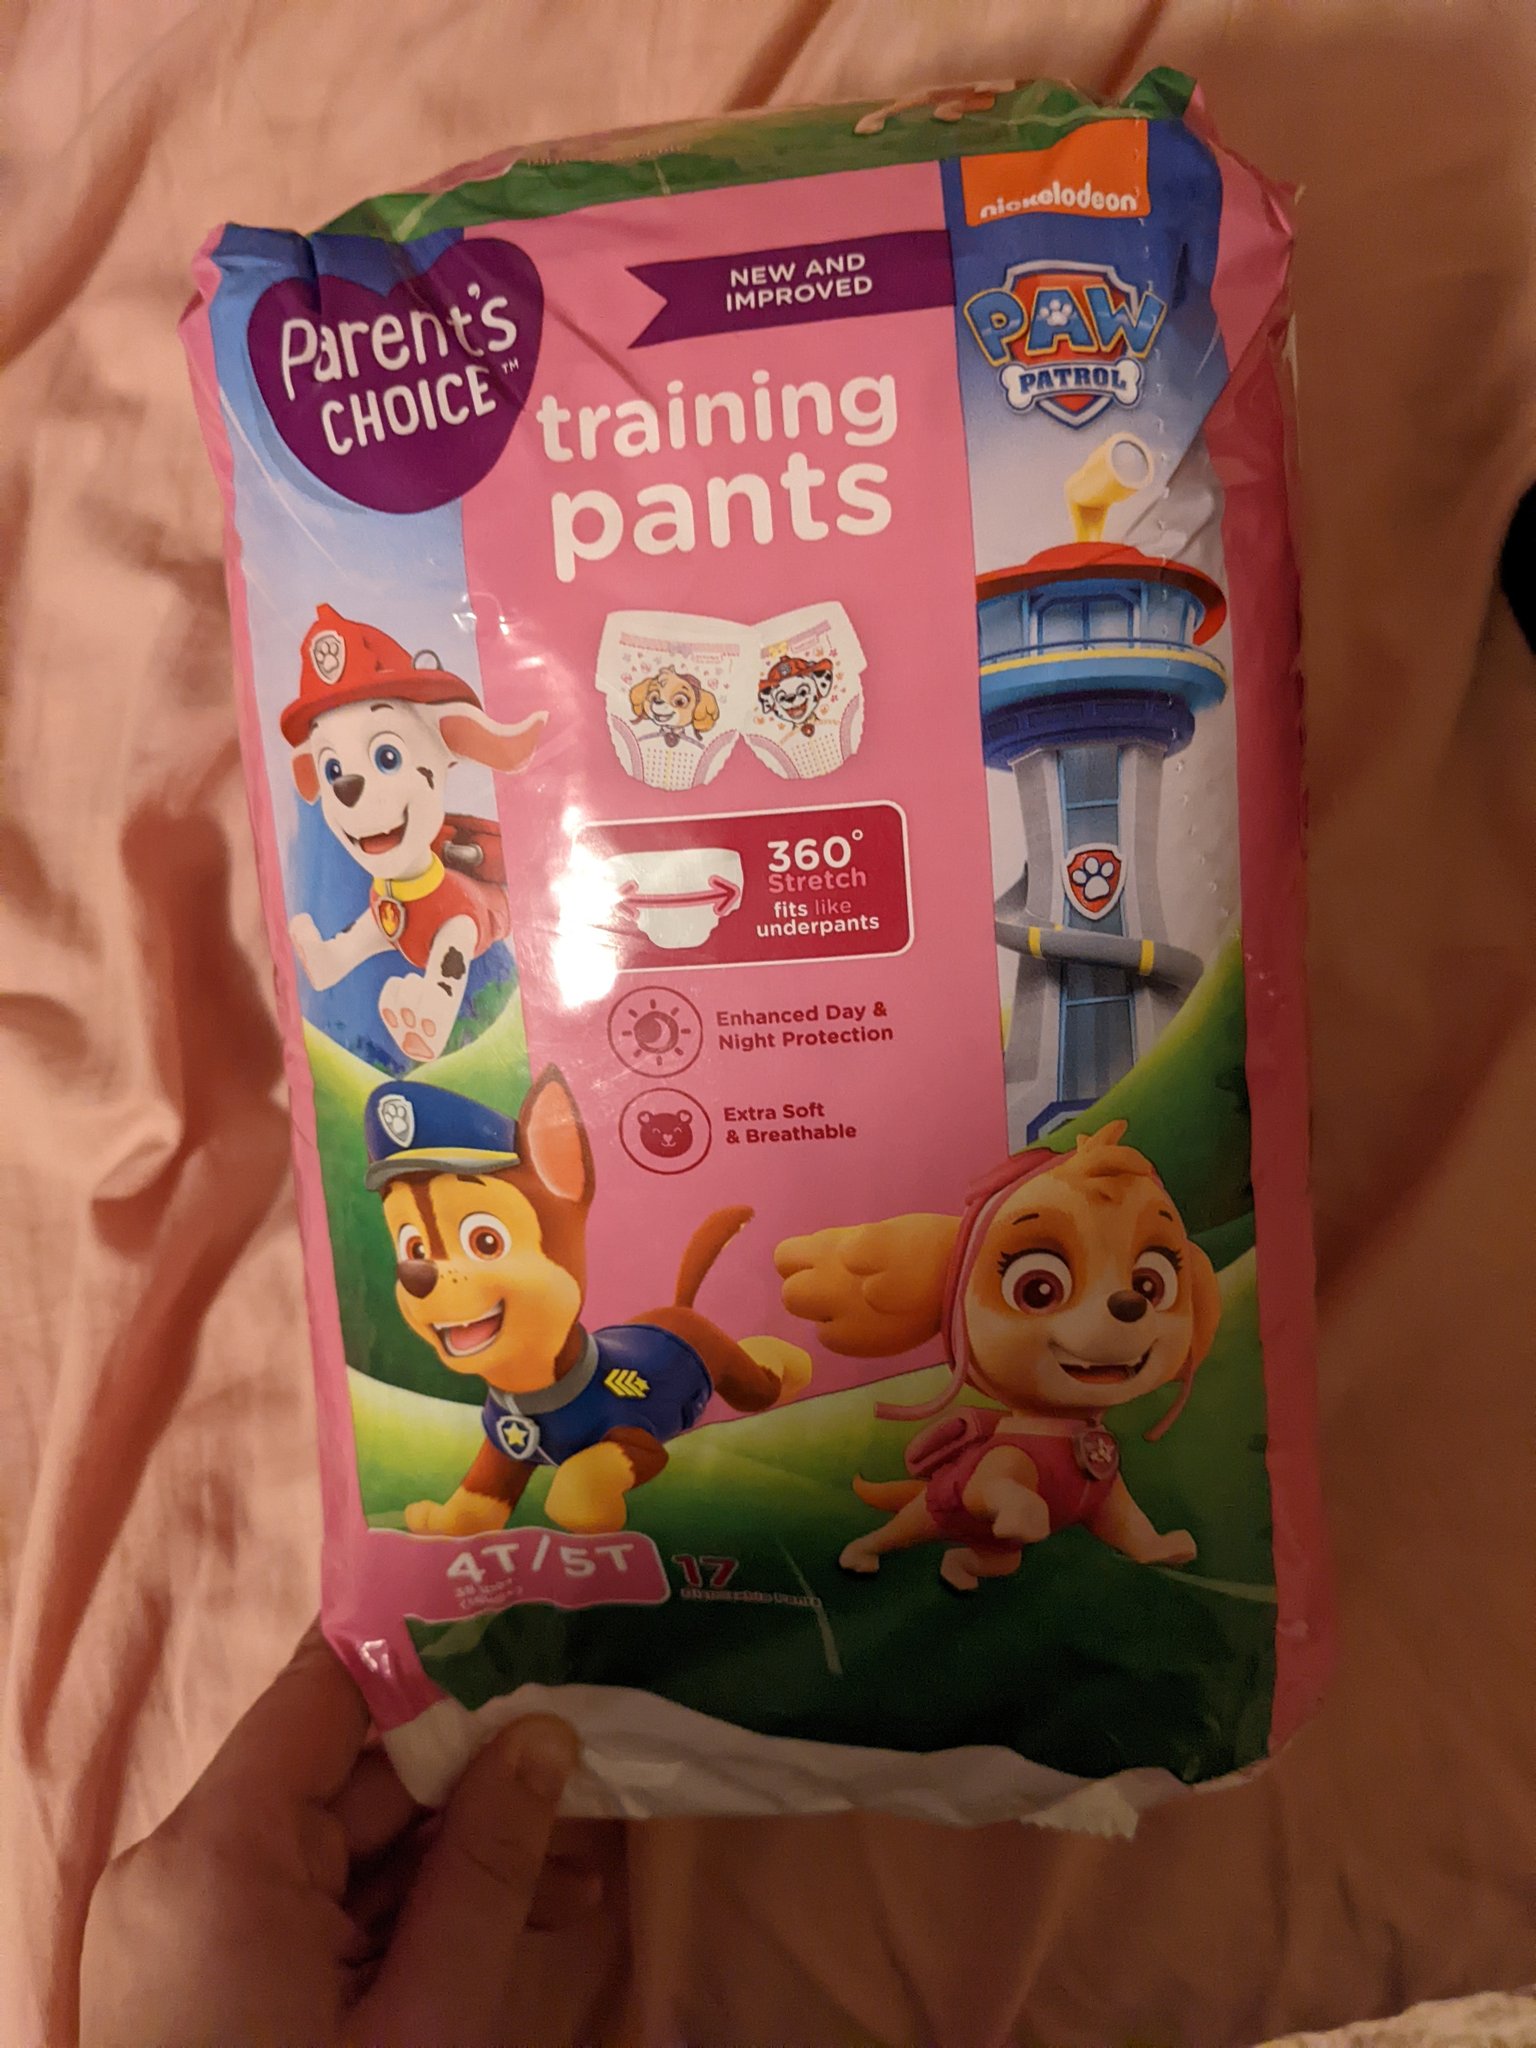 ⭐Izzy⭐ on X: The paw patrol pull ups / training pants seem to have a  gotten a redesign. New packaging is cute but they have a granny panties  type deal up top